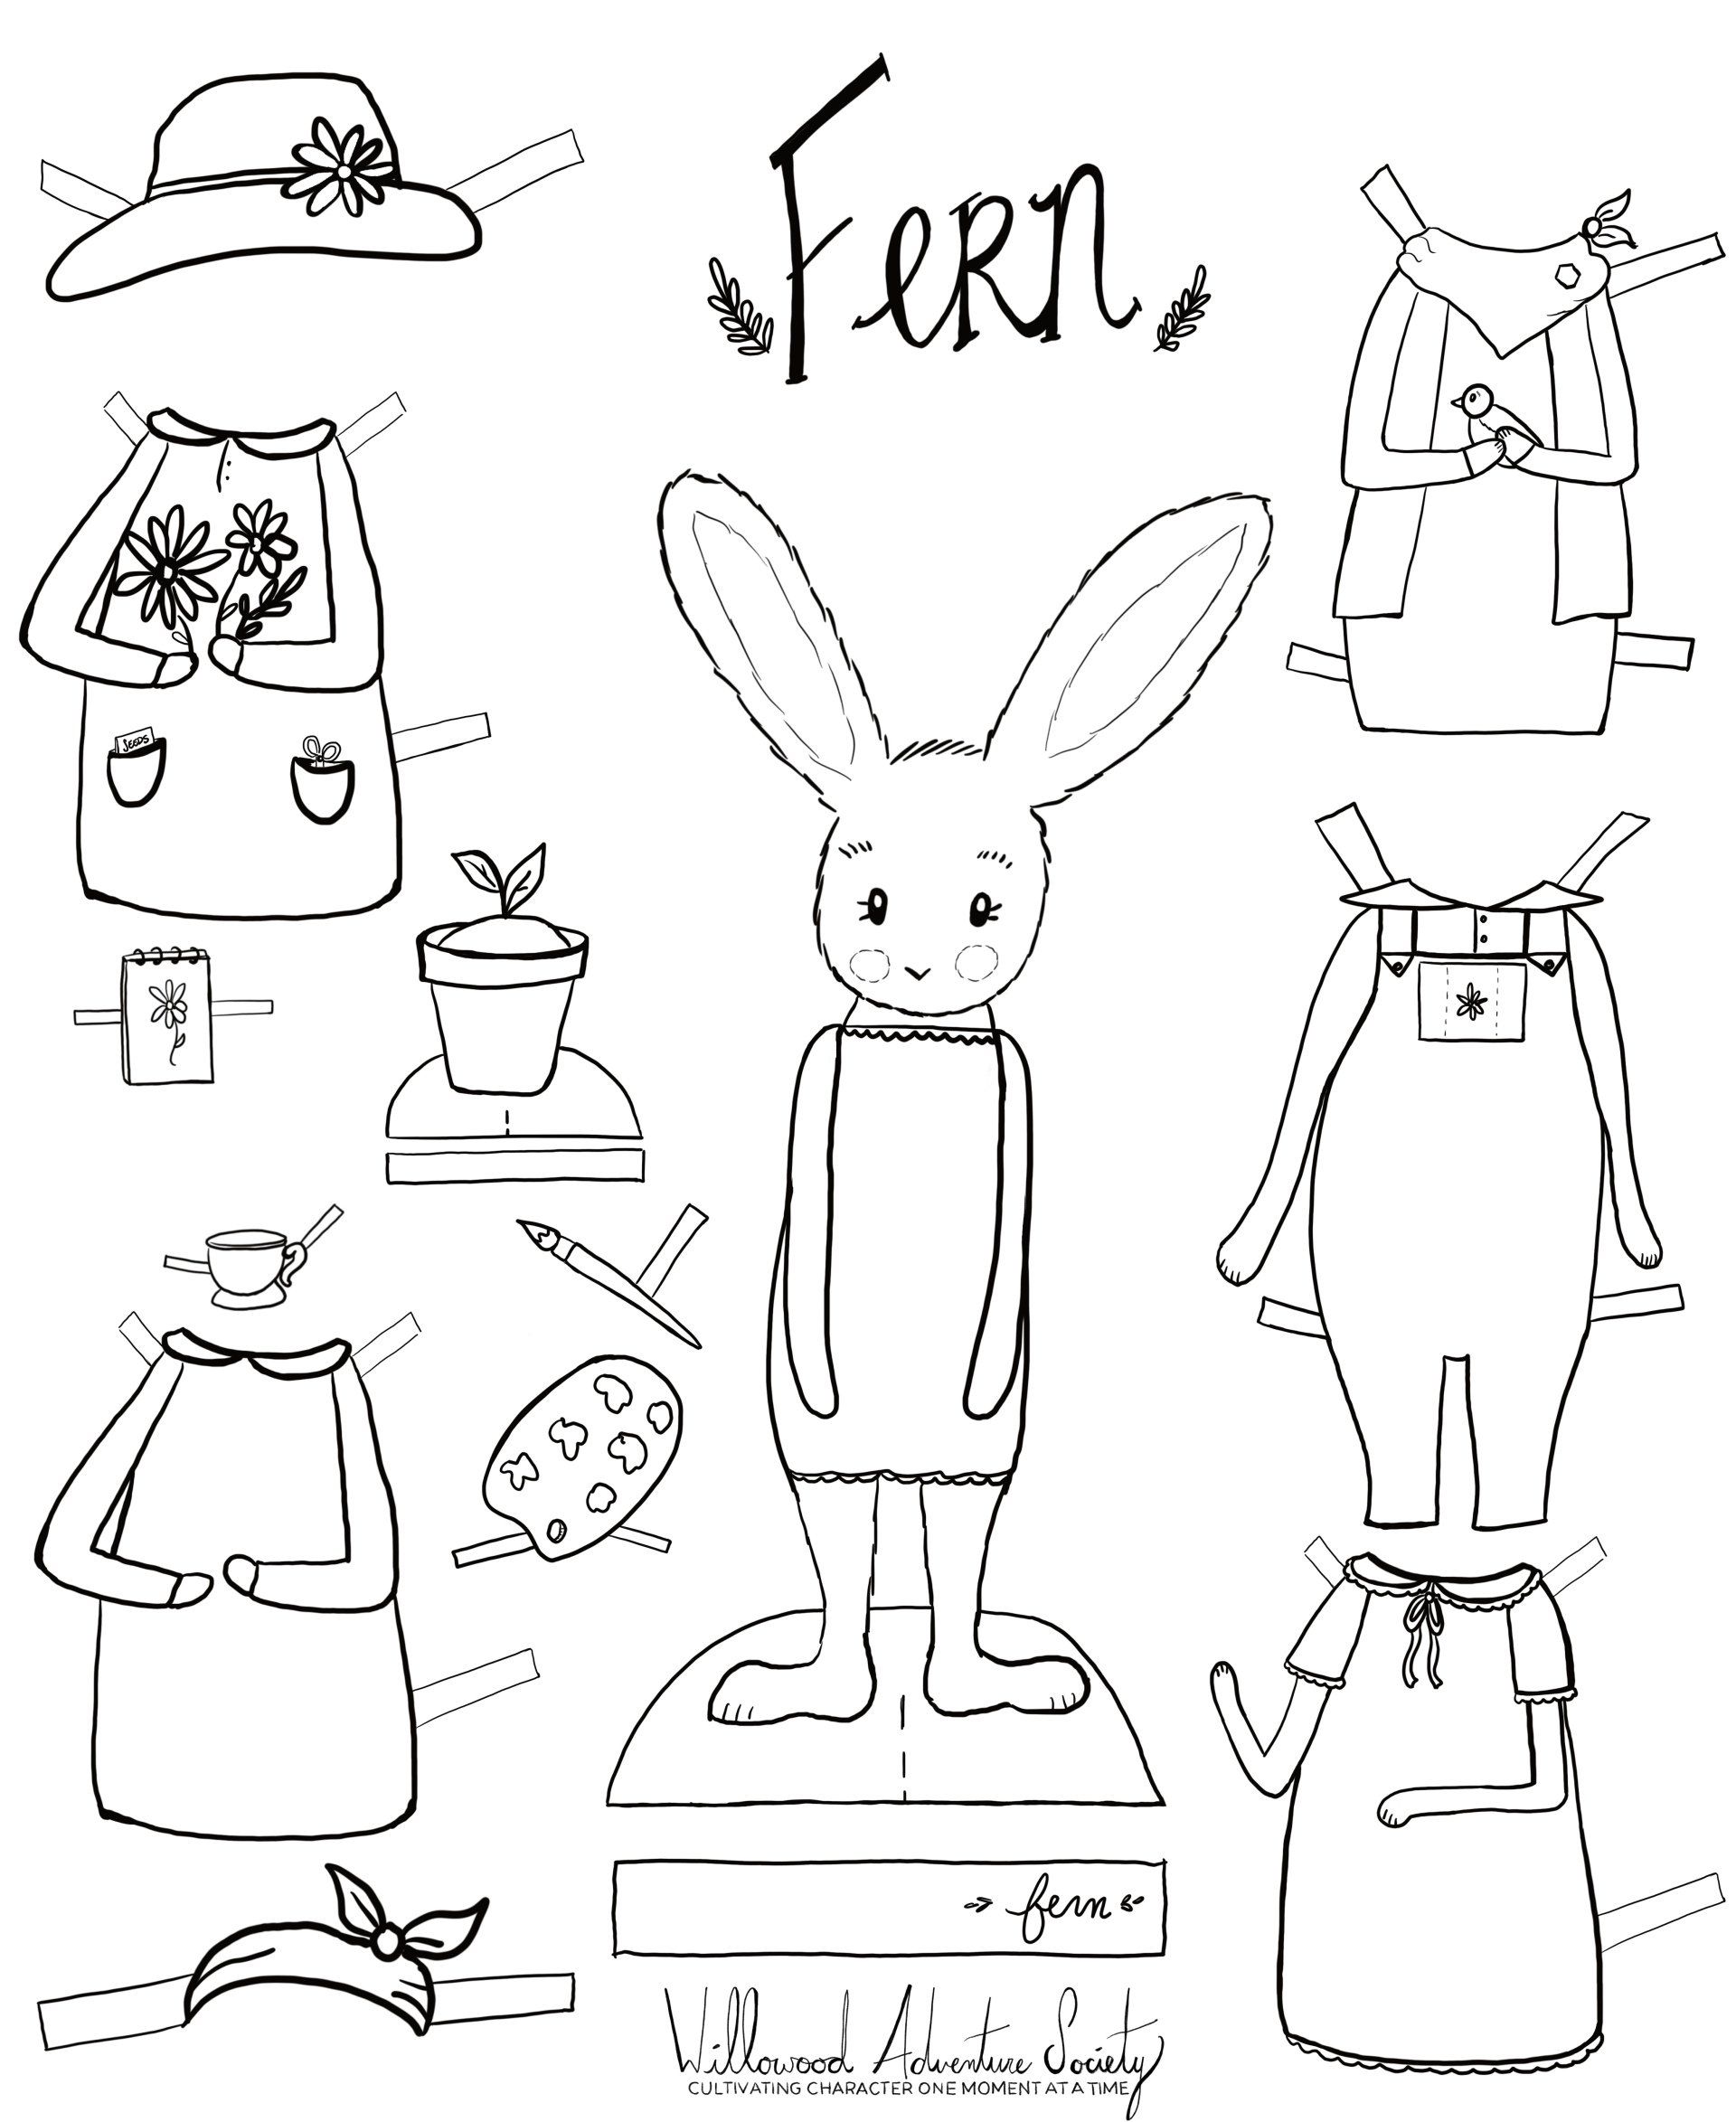 Free Printable Coloring Pages And Activities For Kids : Homeschool